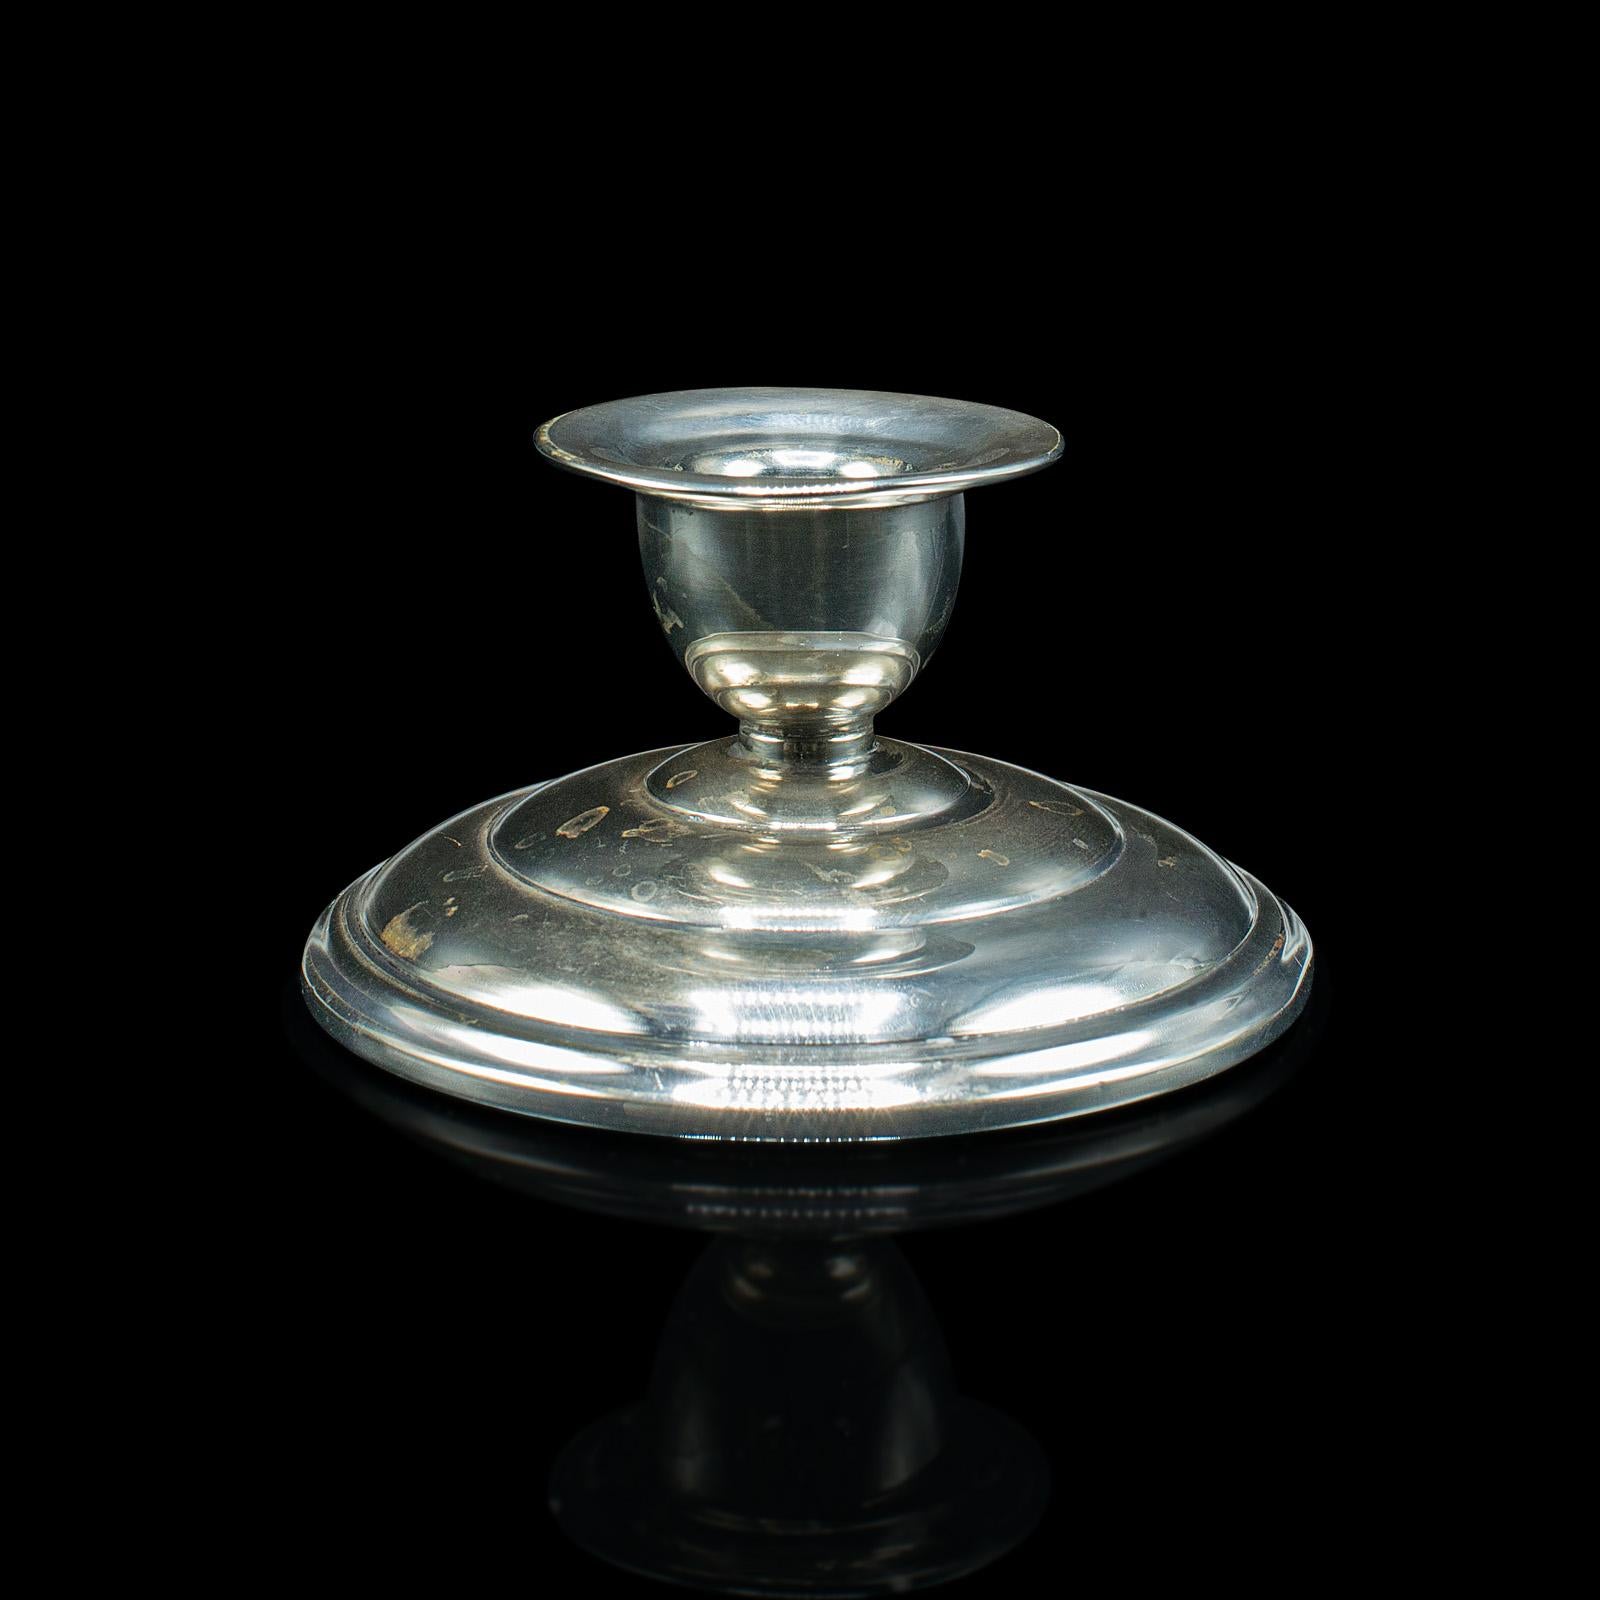 This is an antique parson's candle holder. An English, silver plate nozzle or ink well, dating to the late Victorian period, circa 1900.

Petite candle holder or desktop ink well with bright finish
Displays a desirable aged patina, with some minor